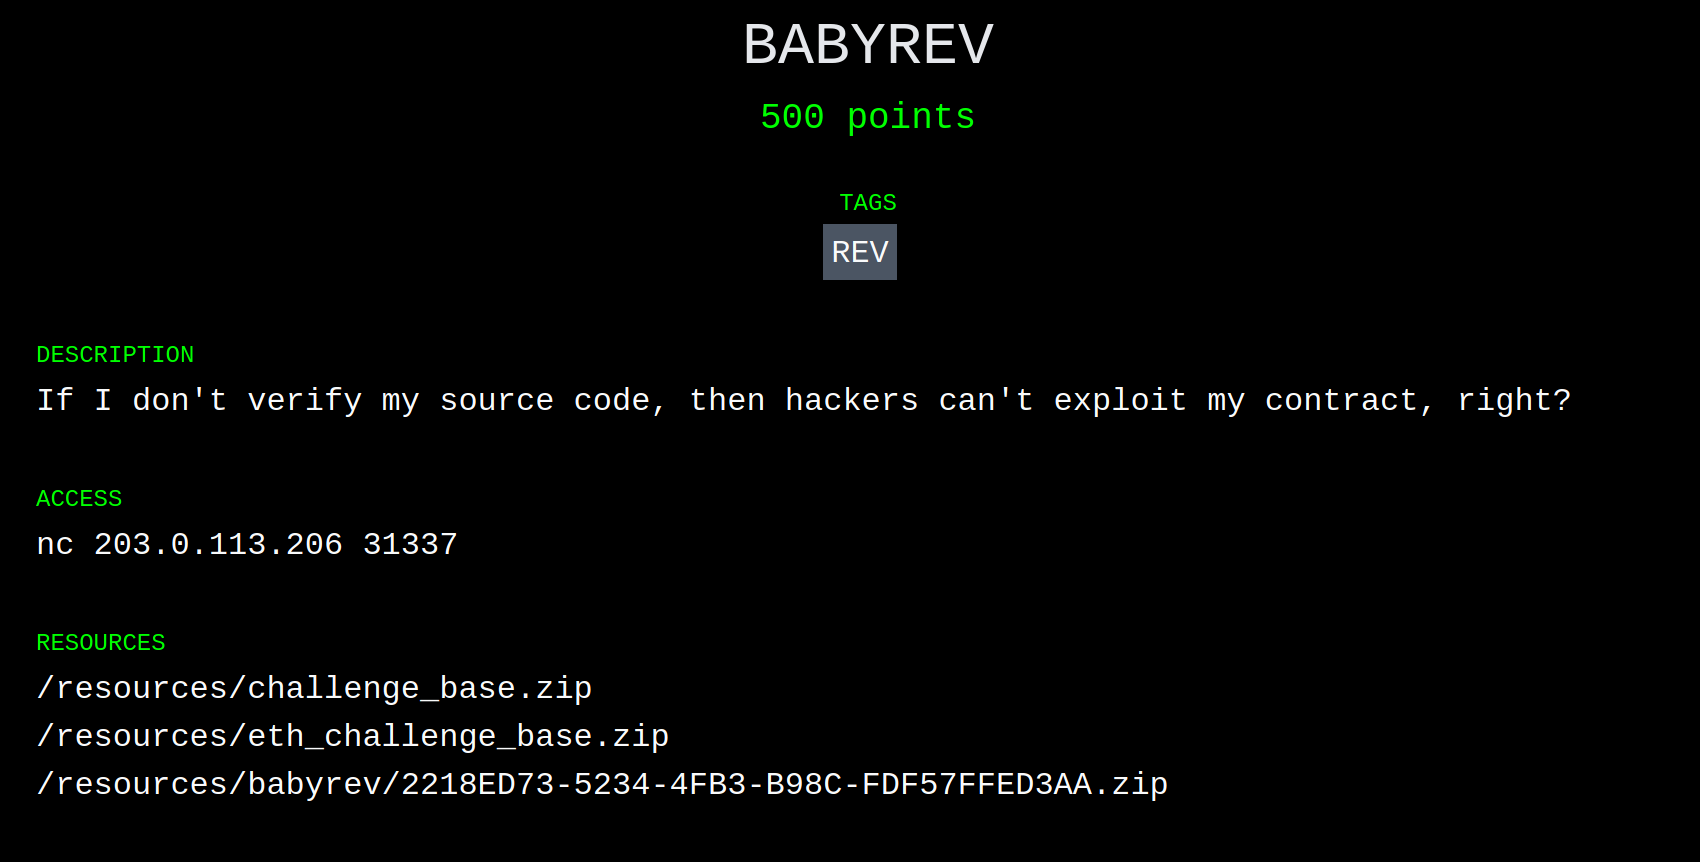 If I don't verify my source code, then hackers can't exploit my contract, right?